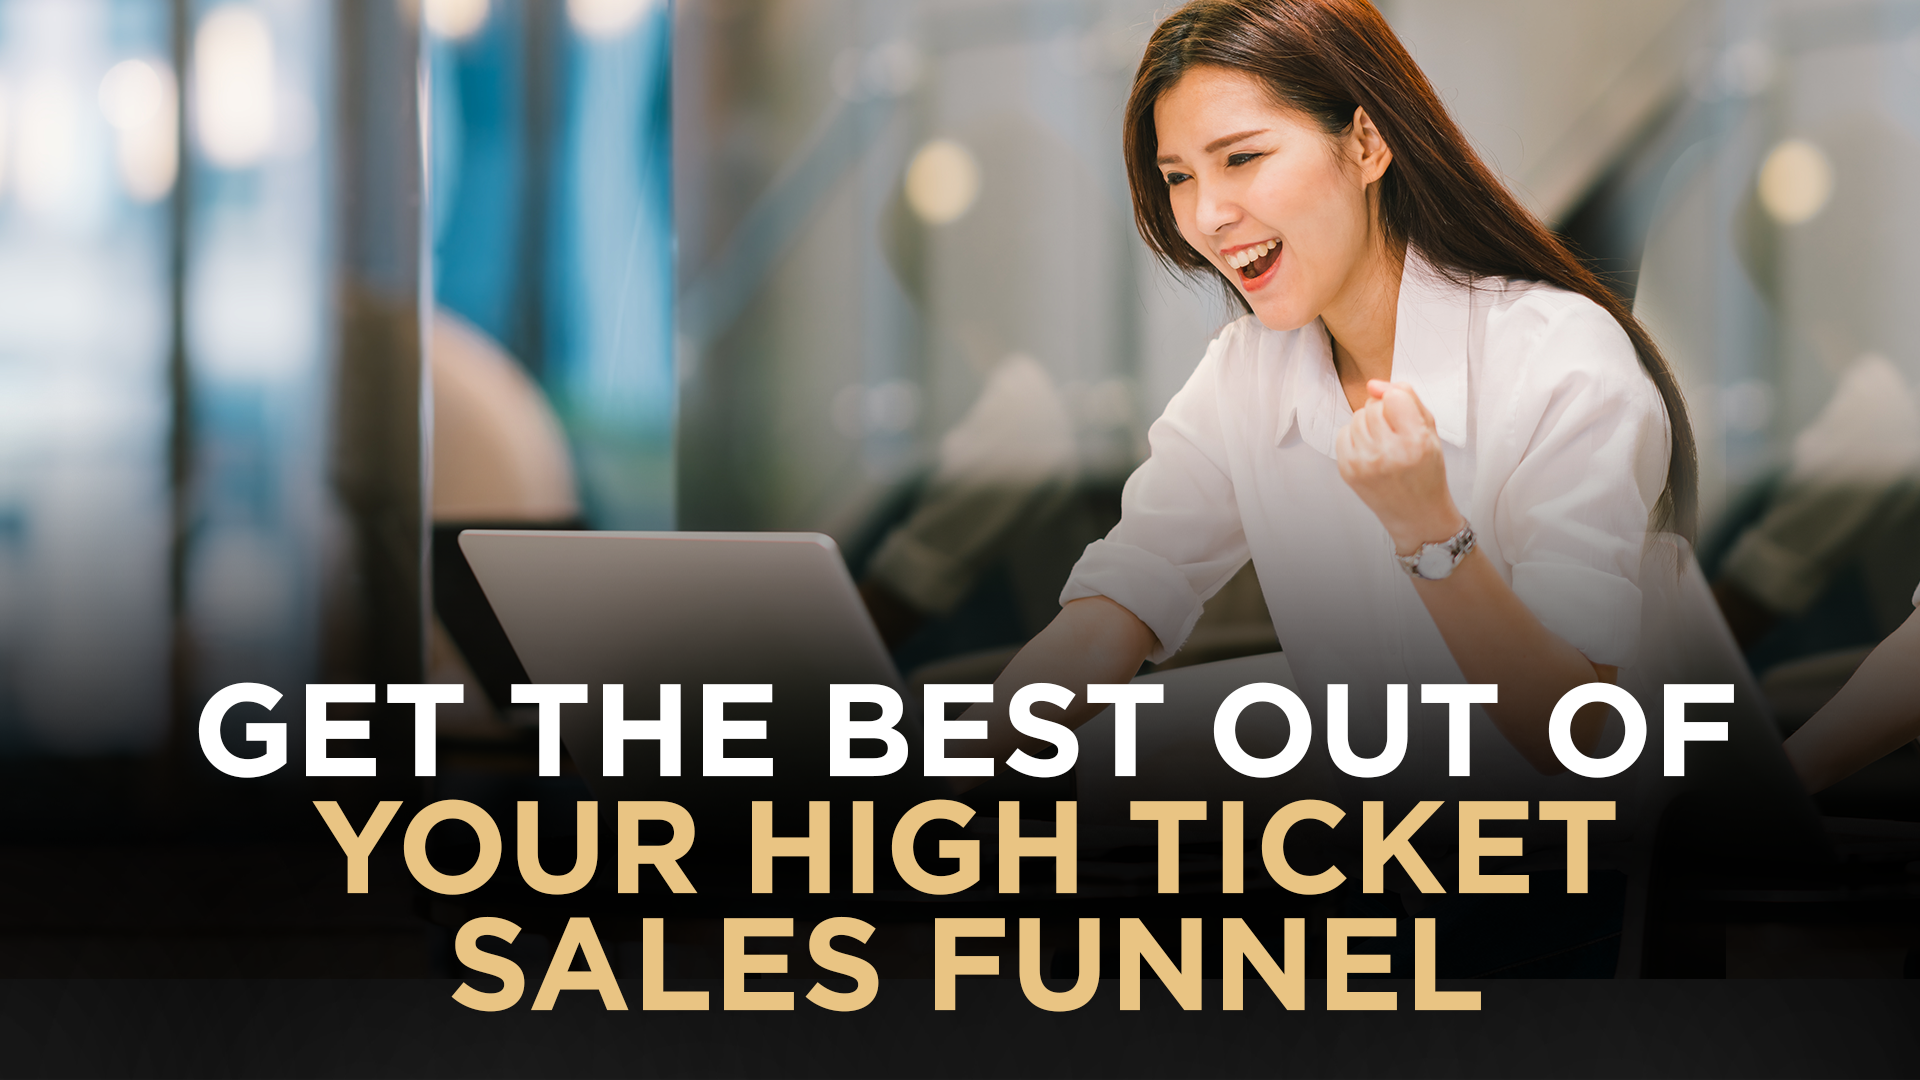 A woman in excitement shows her winning in sales funnel optimization